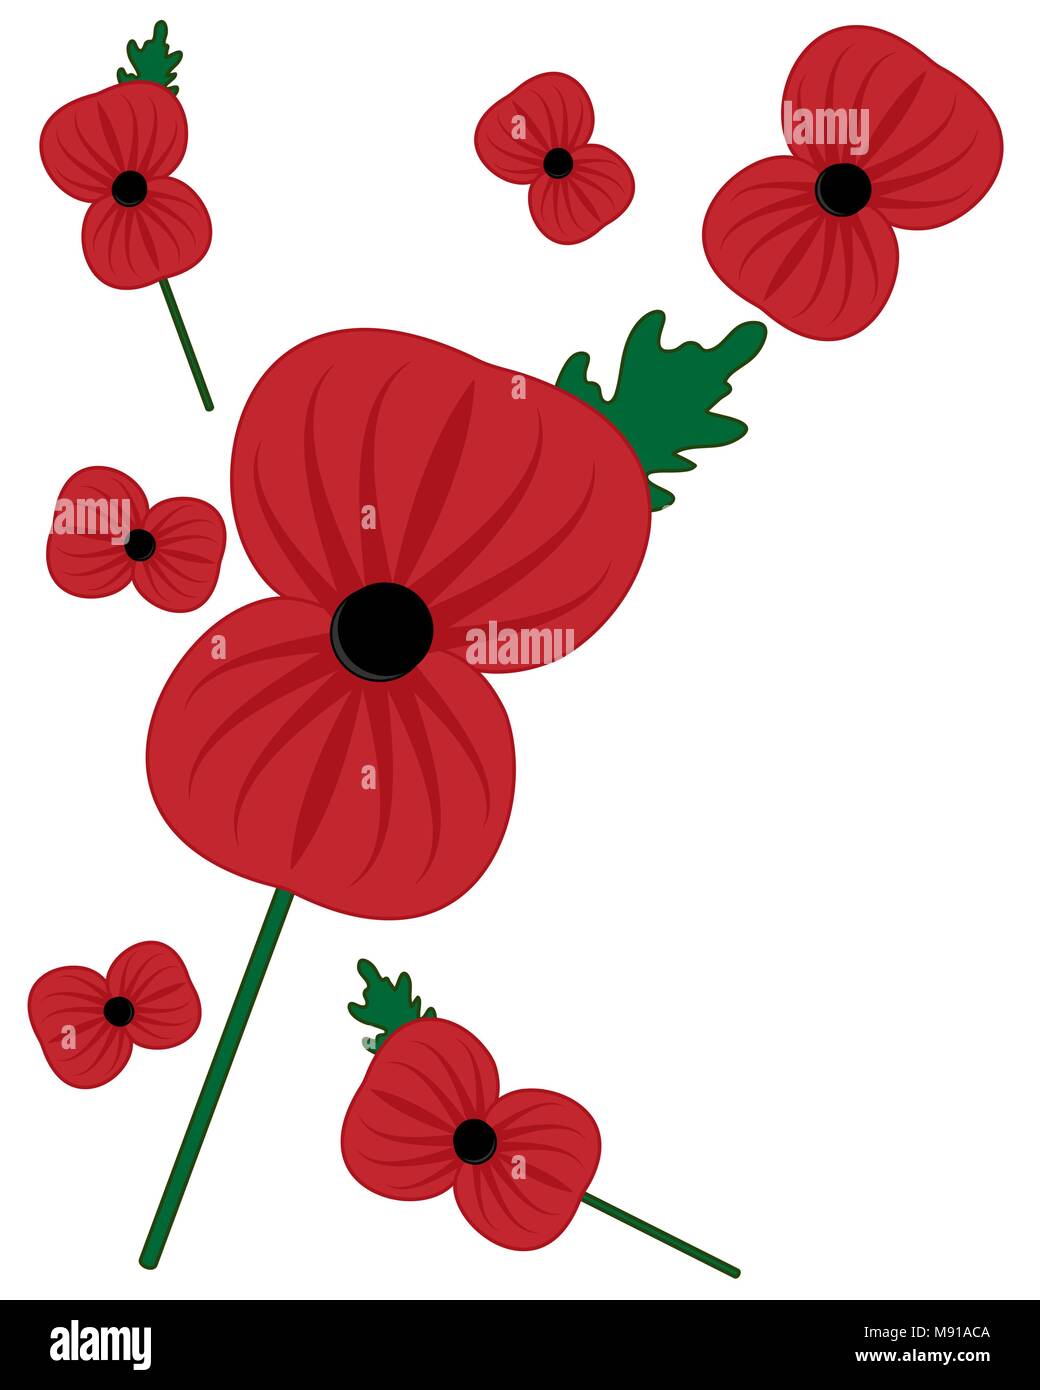 a vector illustration in eps 8 format of bright red remembrance poppy with green leaf and stalk on a white background Stock Vector